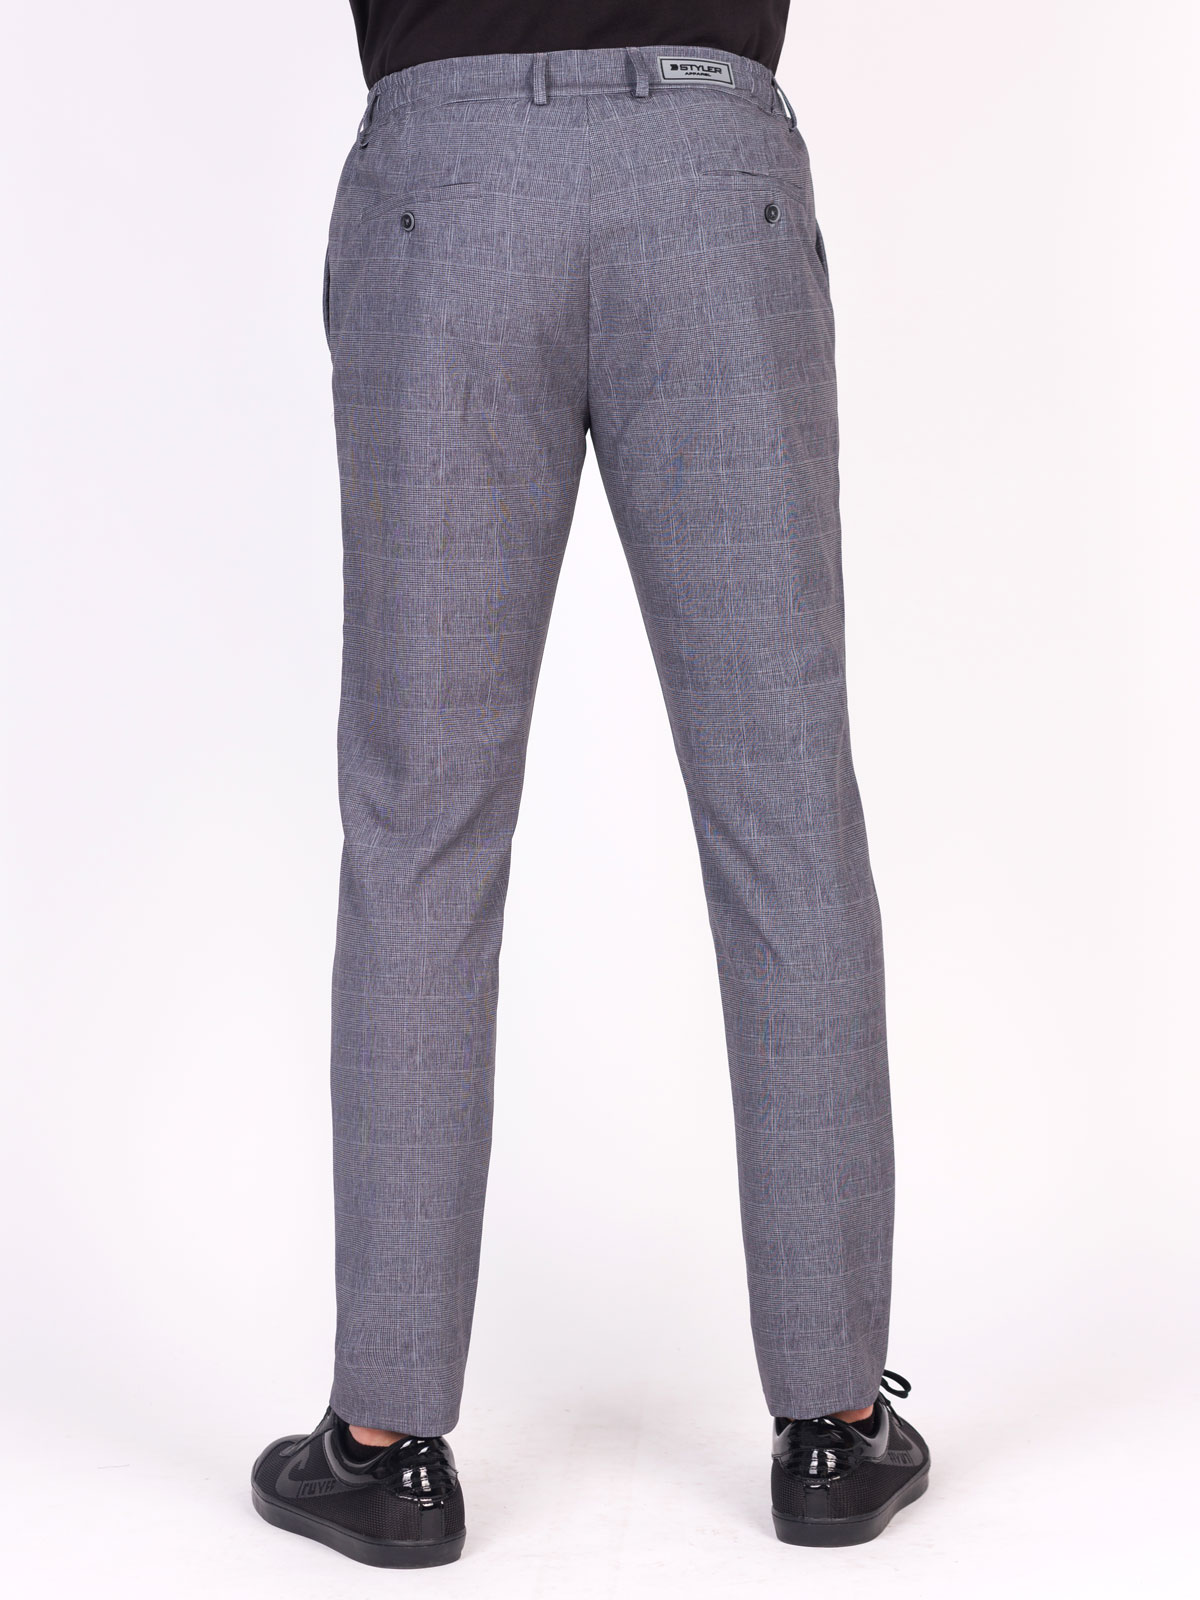 Mens trousers in light grey - 29006 € 55.12 img2